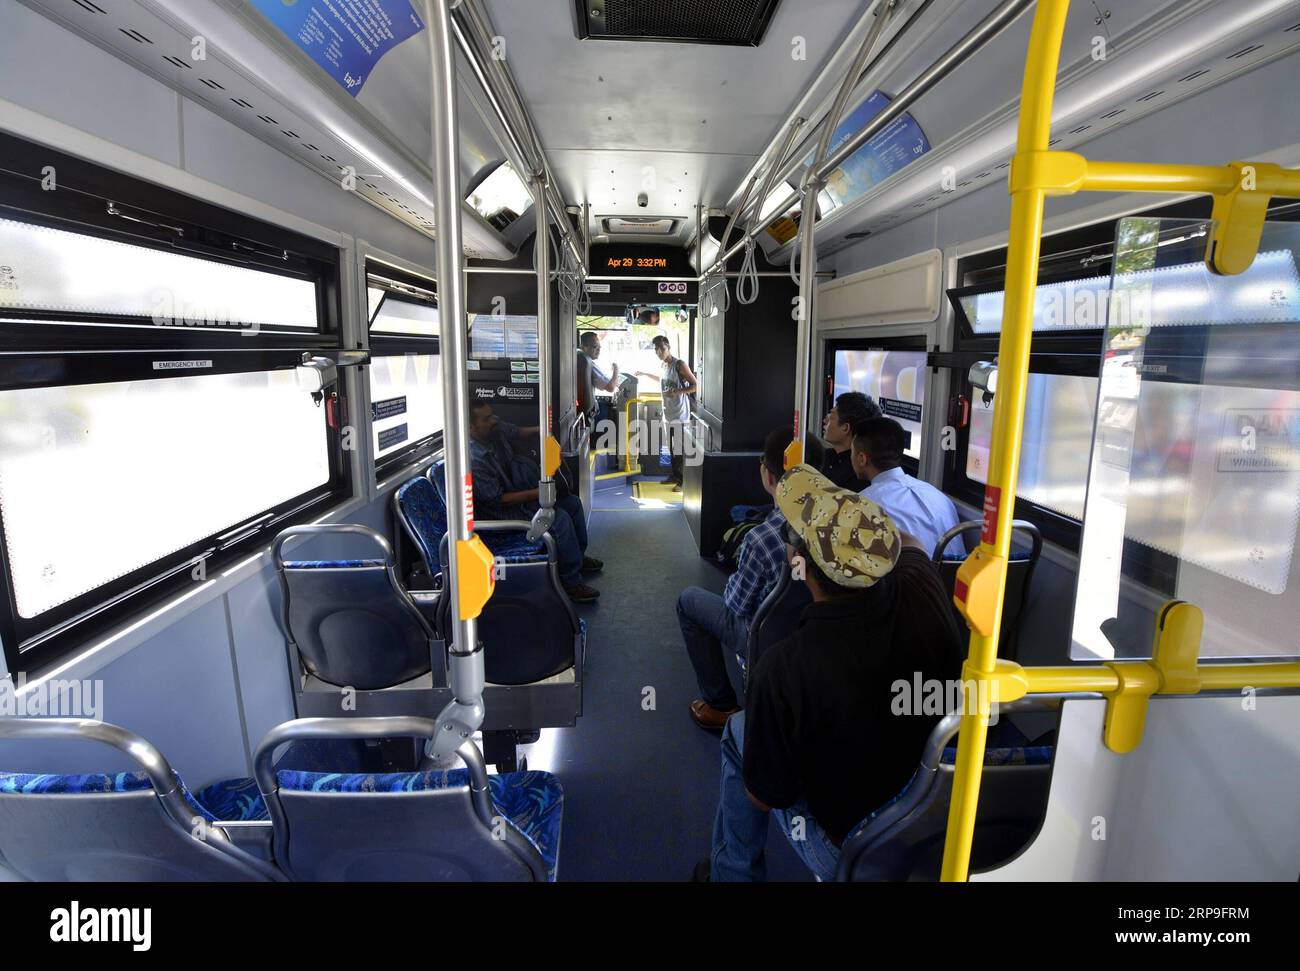 (190405) -- NEW YORK, April 5, 2019 (Xinhua) -- File photo taken on April 29, 2015 shows local residents boarding an electric bus of BYD in the city of Antelope Valley, California, the United States. The Antelope Valley Transit Authority (AVTA) has ordered 85 electric buses from BYD, and 25 buses have been delivered up to now, according to the company. China s leading electric vehicle maker BYD held a ceremony on April 3 to celebrate its 300th bus at its Lancaster manufacturing plant in the U.S. state of California, marking a milestone for production. The 300th bus, a 35-foot BYD K9S model tra Stock Photo